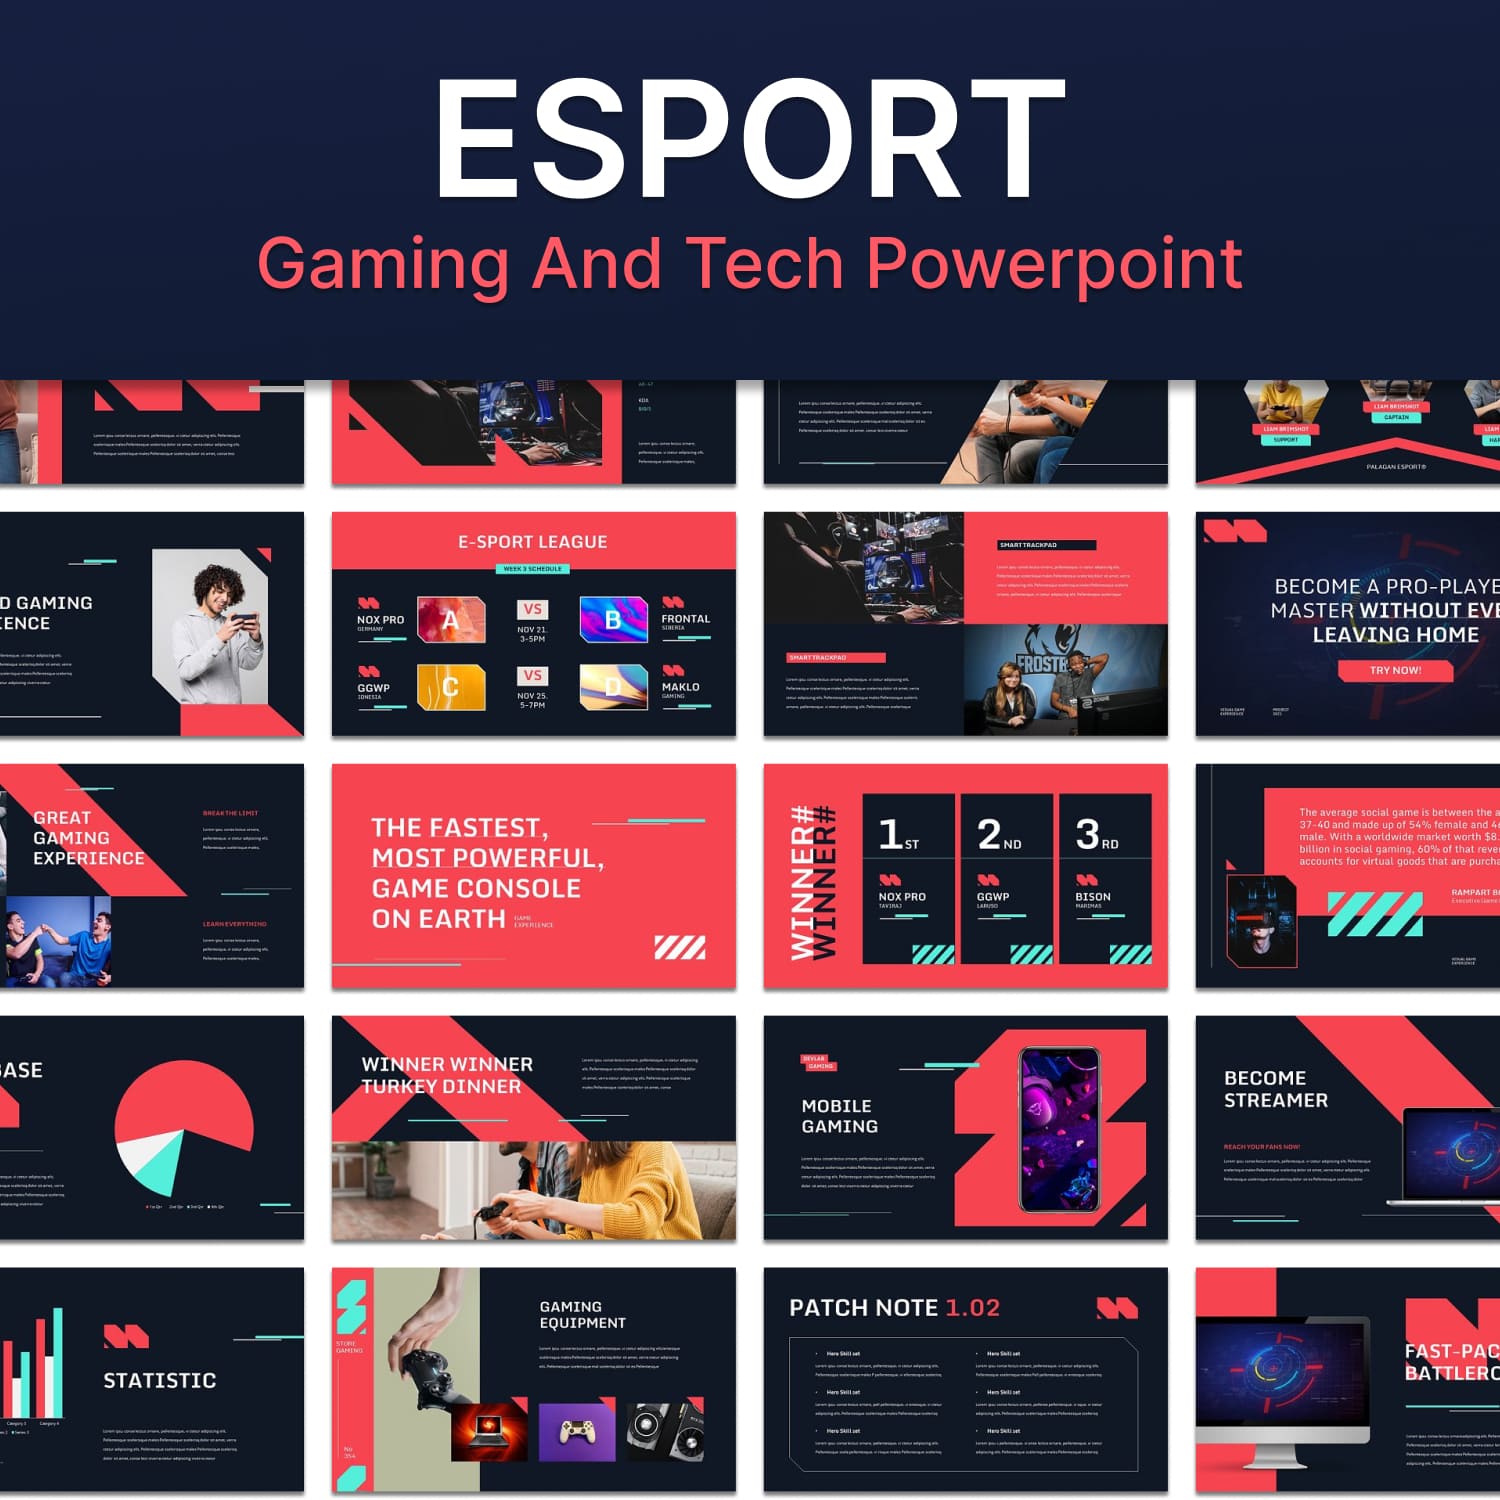 Esport - Gaming and Tech Powerpoint.